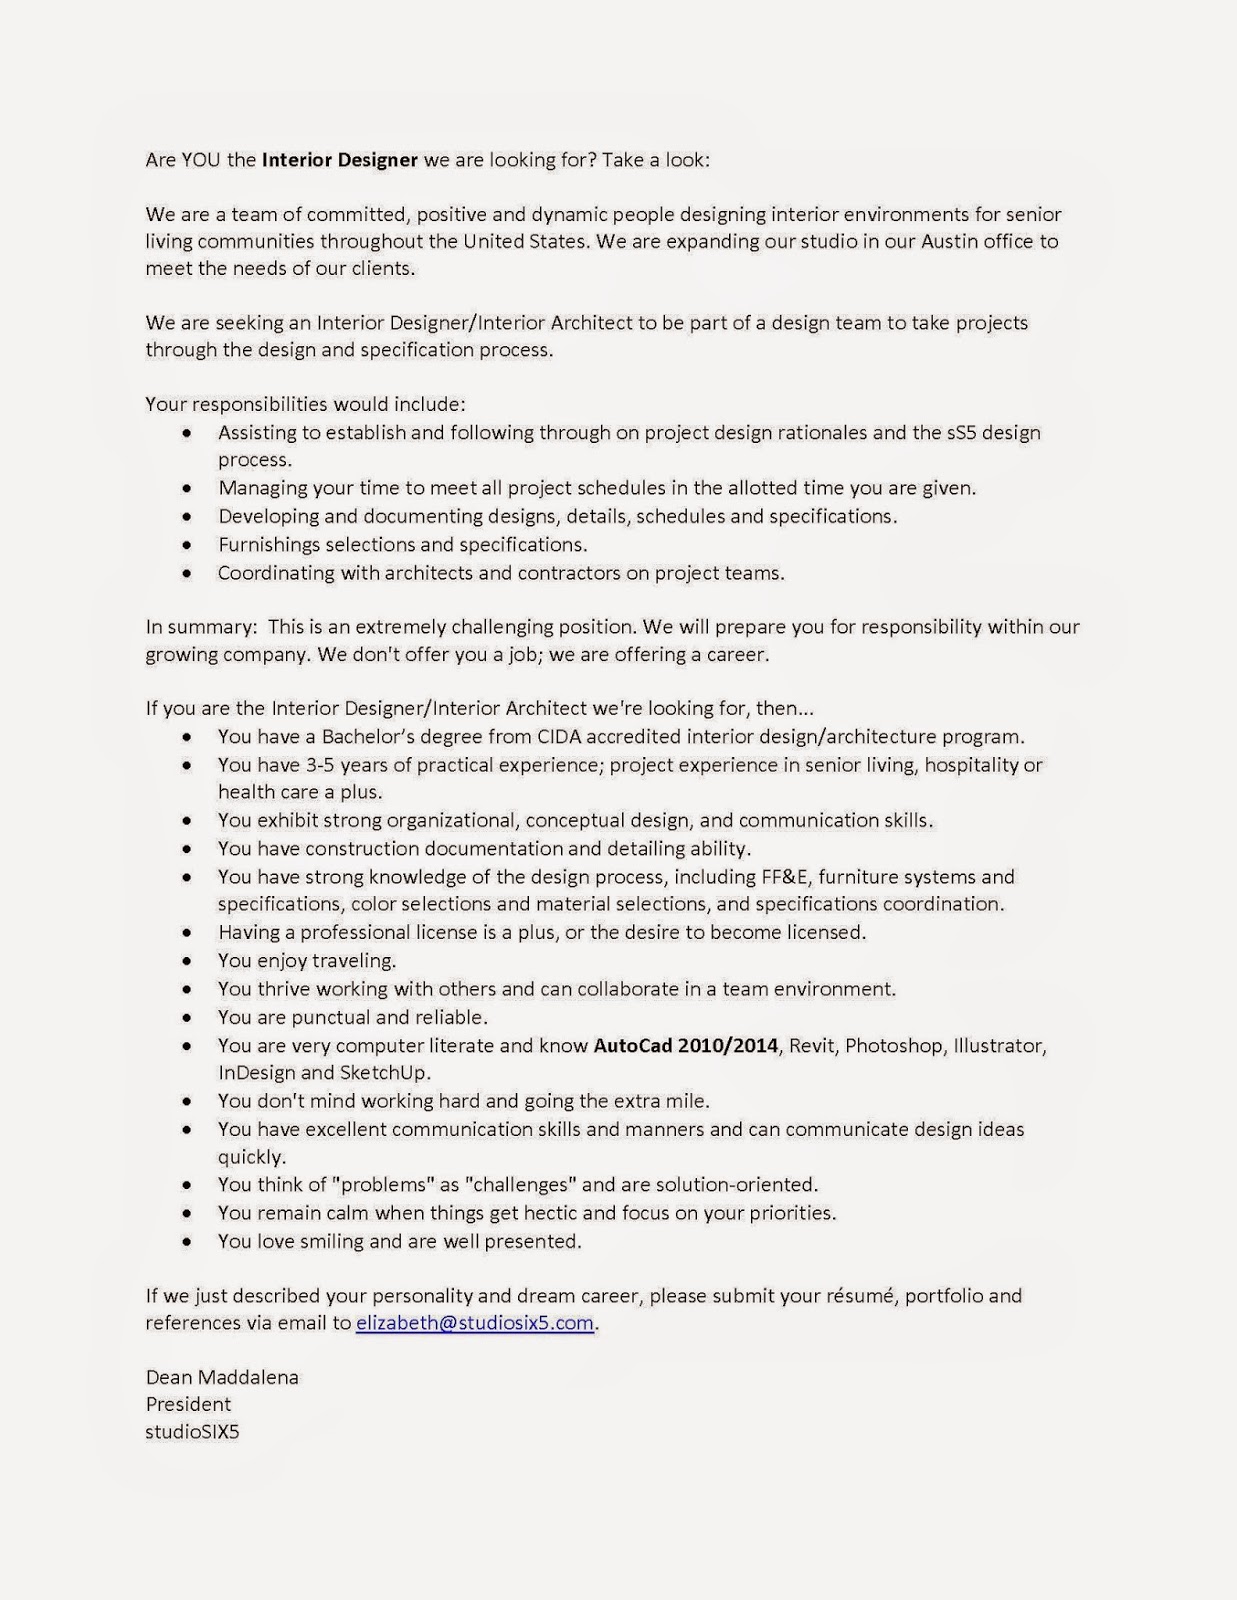 Dynamic cover letter openings